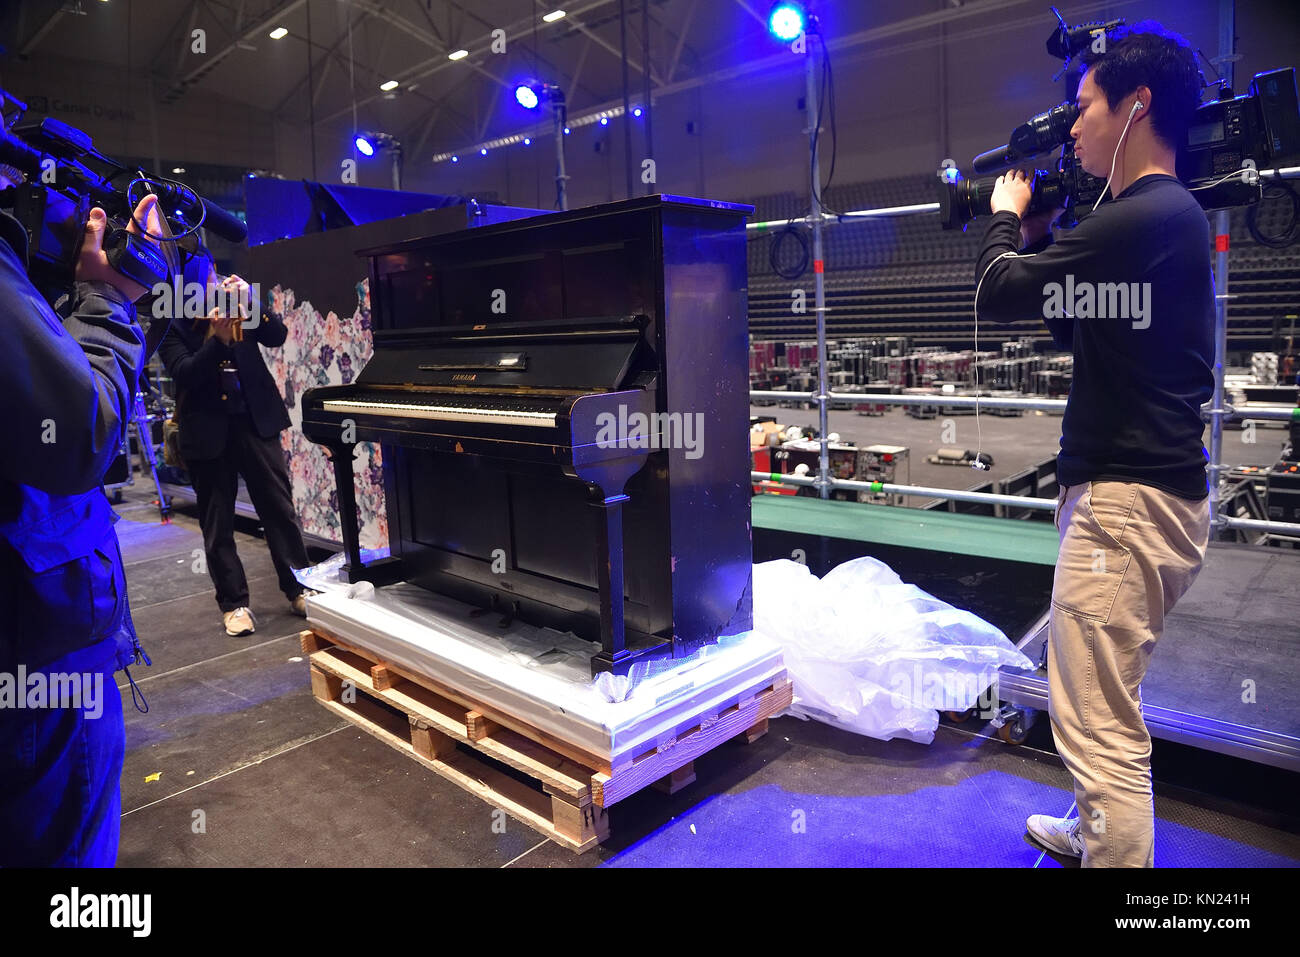 Oslo, Norway. 09th Dec, 2017. A piano which has survived the Hiroshima nuclear explosion has been unpacked in Norway, and it will be played at the Nobel Peace Prize Concert this year. It is one of the six pianos which survived the atomic bombings of Hiroshima and Nagasaki in August 1945. 9th Dec, 2017. The 2017 Nobel Peace Prize has been awarded to the International Campaign to Abolish Nuclear Weapons (ICAN), and this piano is a reminder of the catastrophic humanitarian consequences of the use of nuclear weapons Credit: C) ImagesLive/ZUMA Wire/Alamy Live News Credit: ZUMA Press, Inc./Alamy Liv Stock Photo